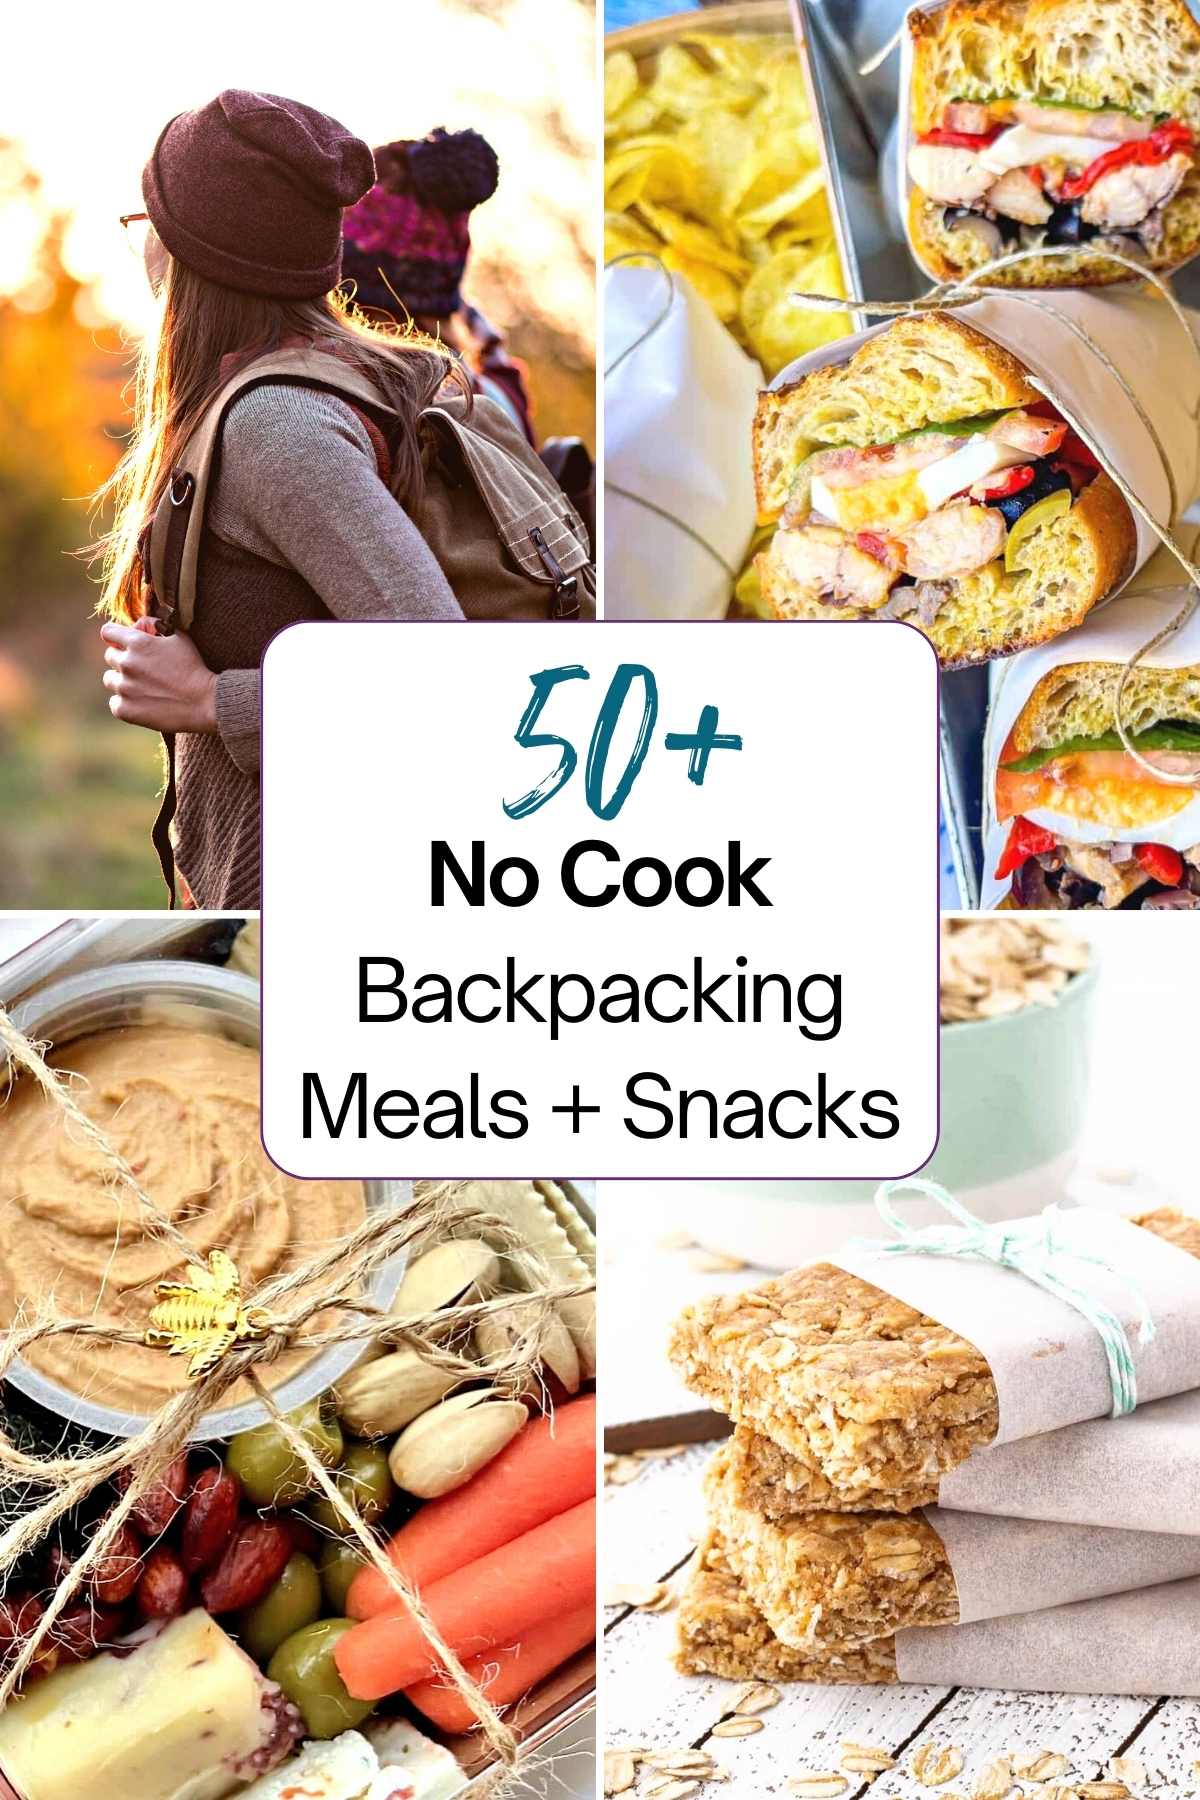 Collage of 3 no-cook meals and 1 photo of people hiking with article title on a white banner in the middle. Article title is, "50+ no cook backpacking meals and snacks".